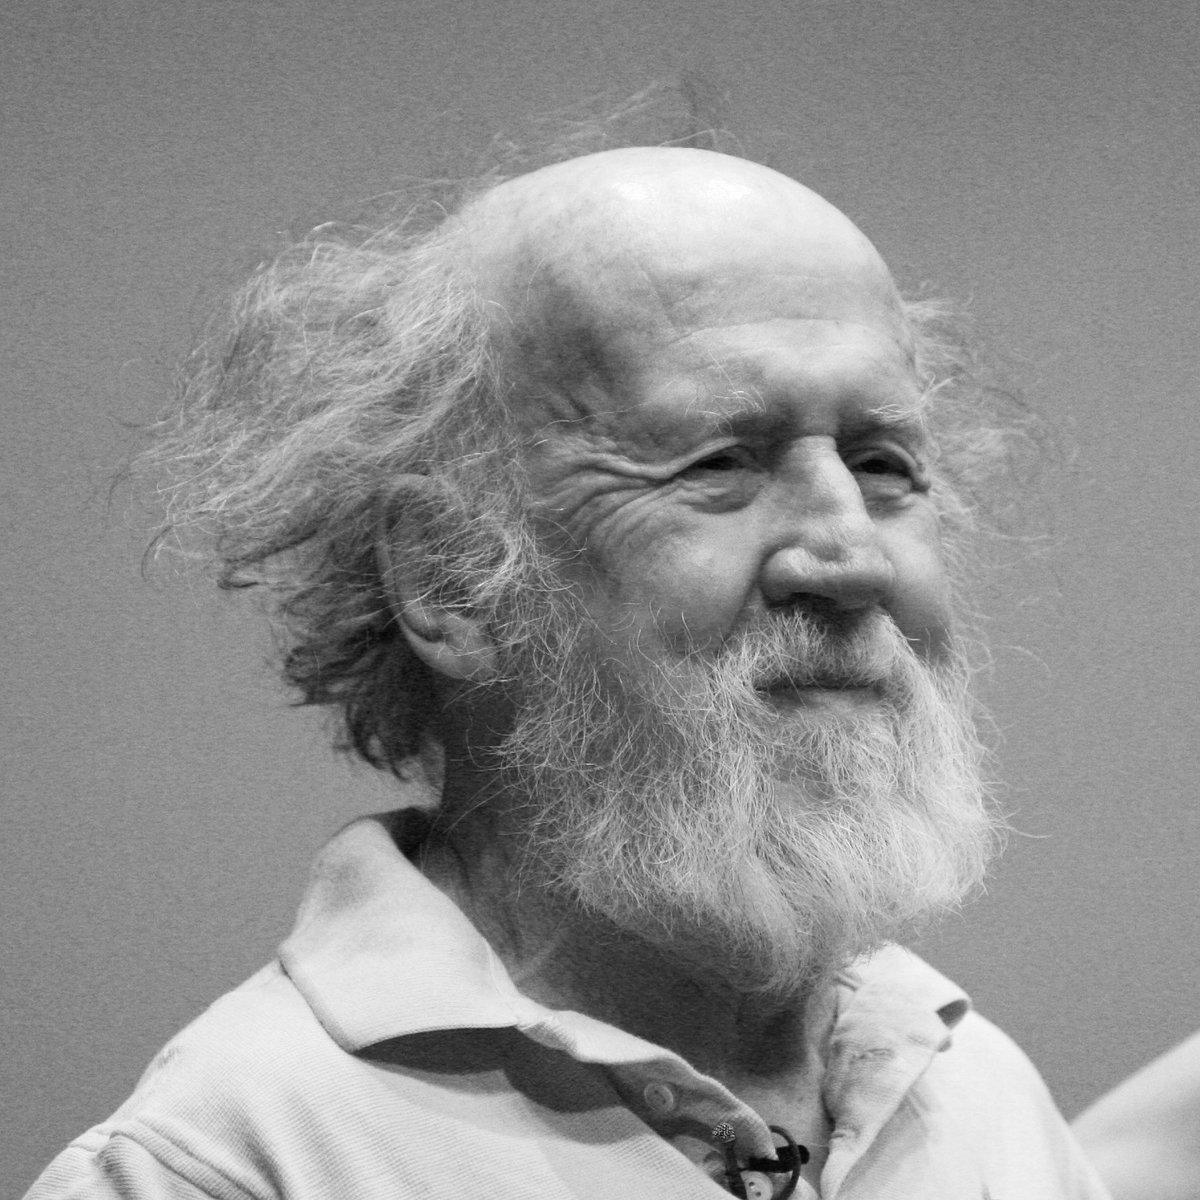 'Man is the most insane species. He worships an invisible God and destroys a visible Nature. Unaware that this Nature he's destroying is this God he's worshipping.' -- Hubert Reeves